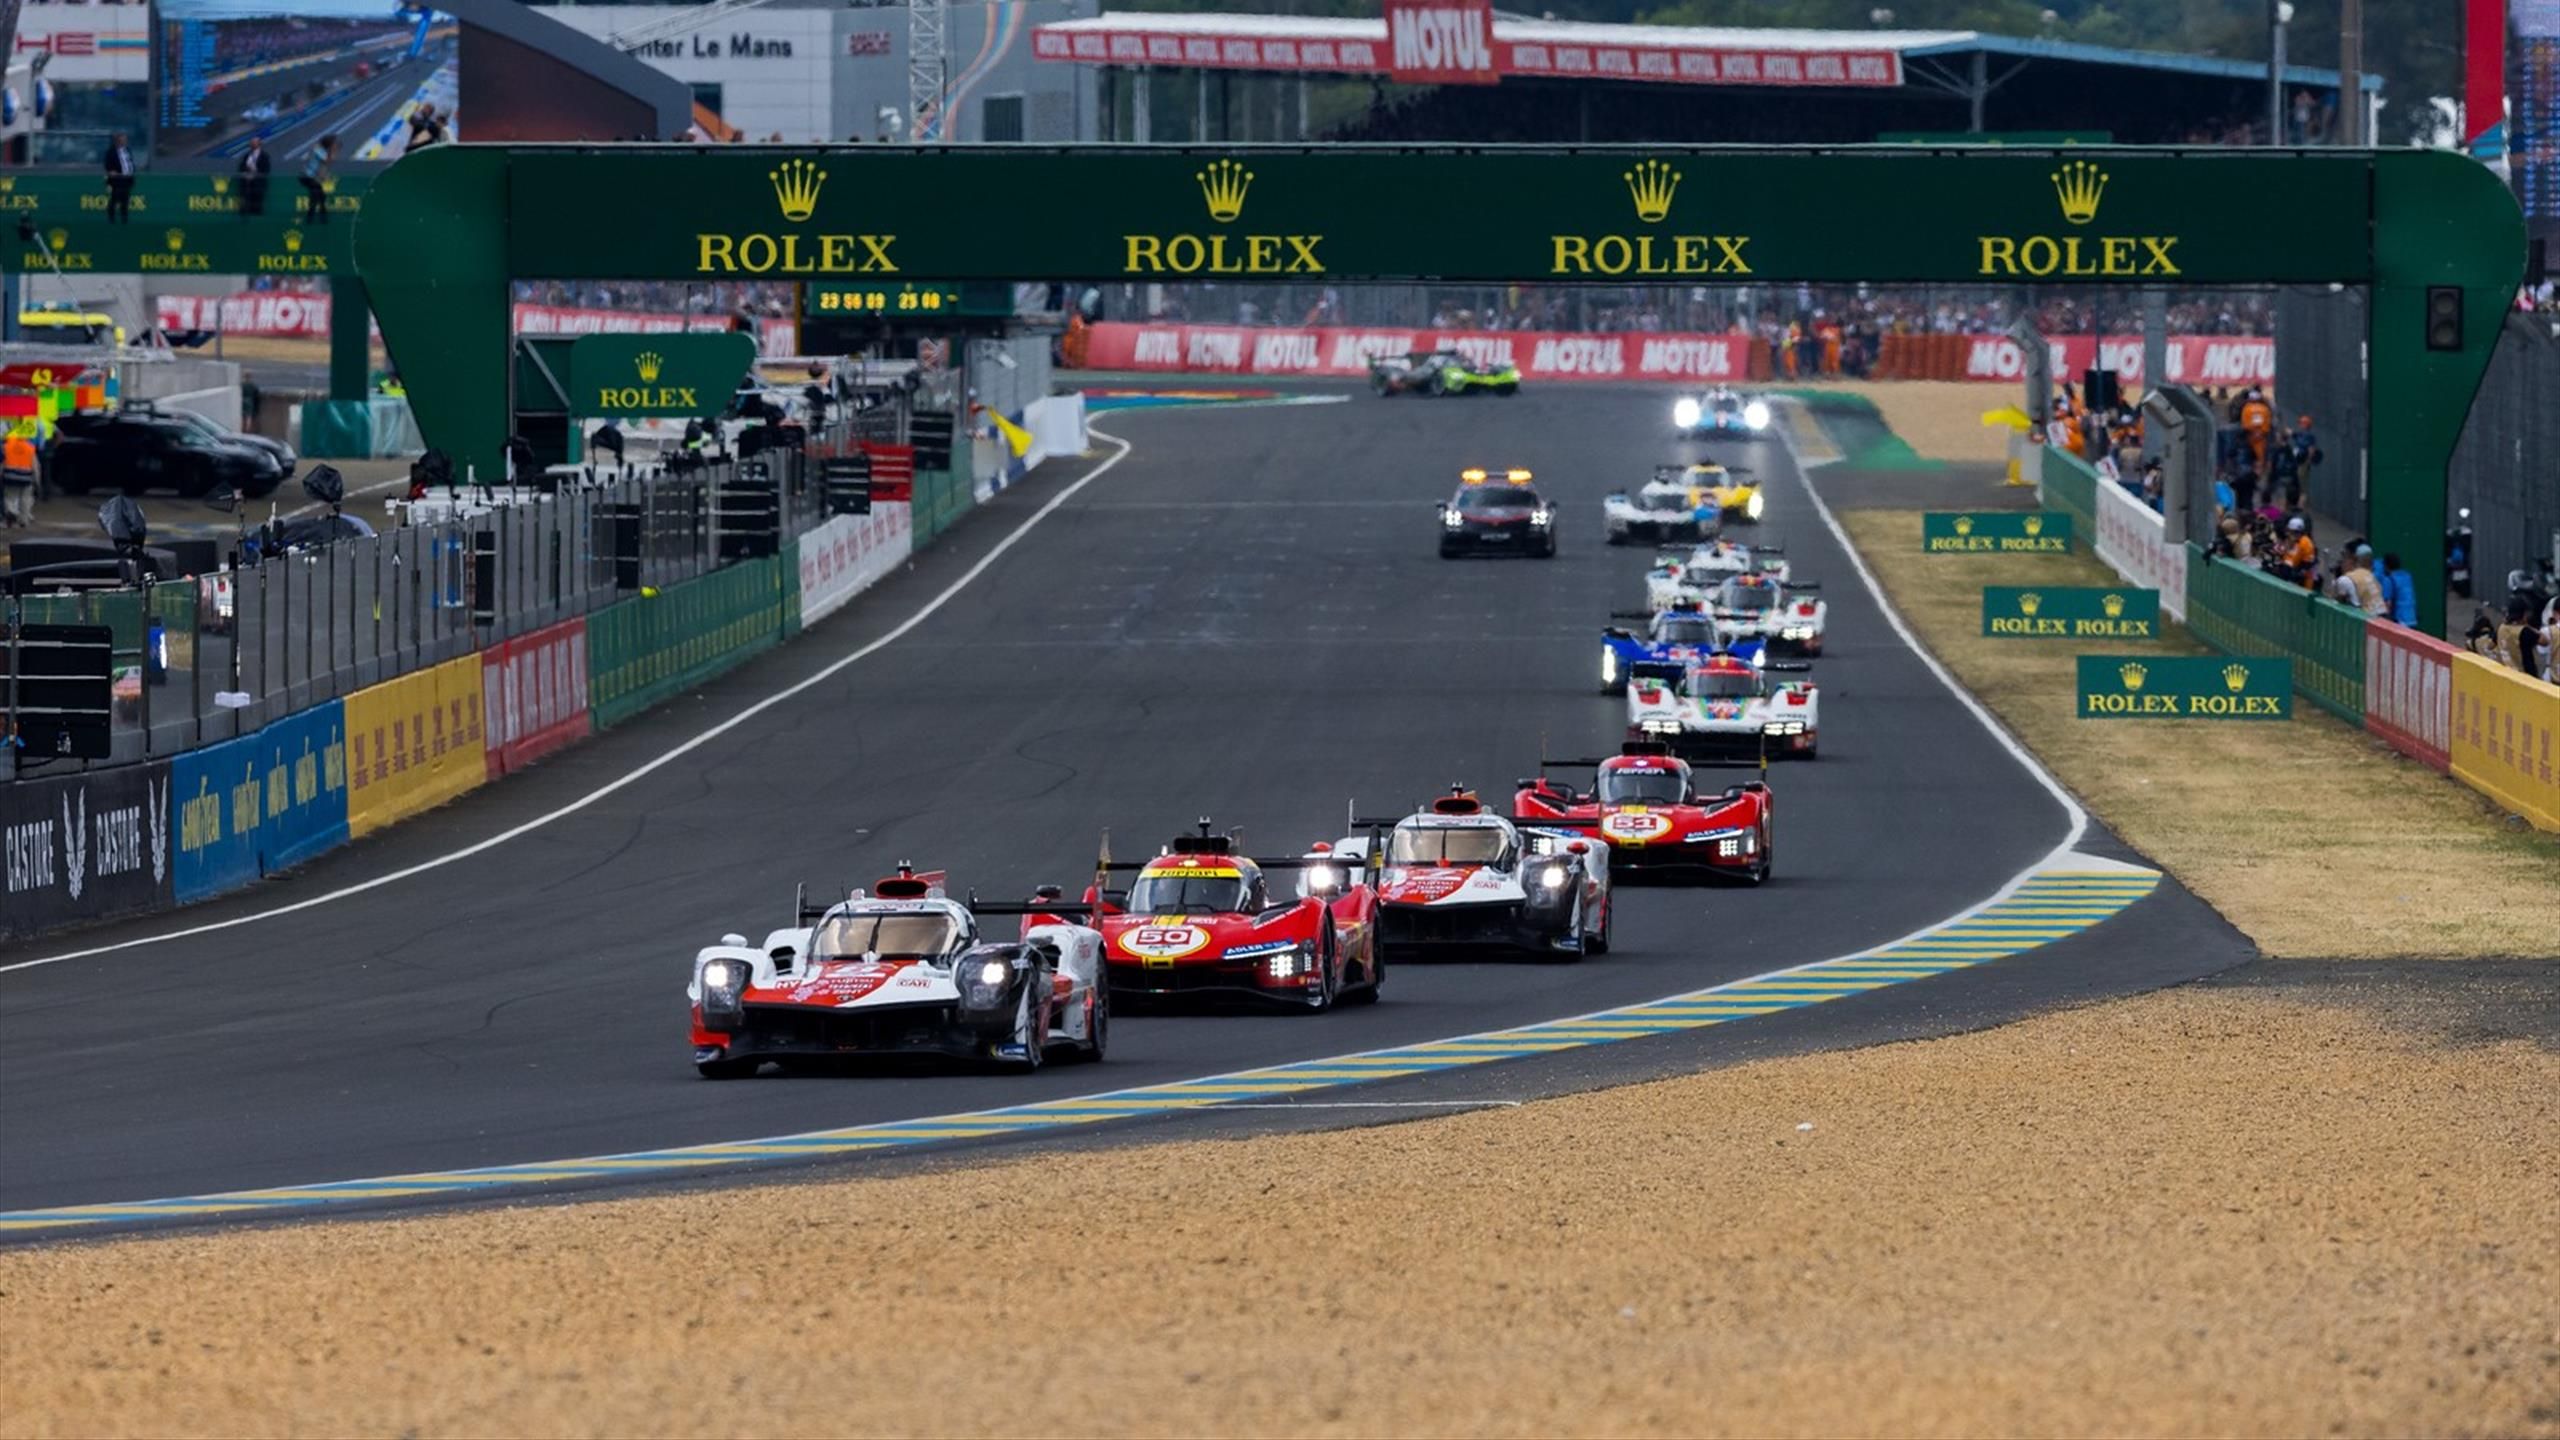 The biggest concern for WEC right now is: How will there be room to accommodate so many cars?